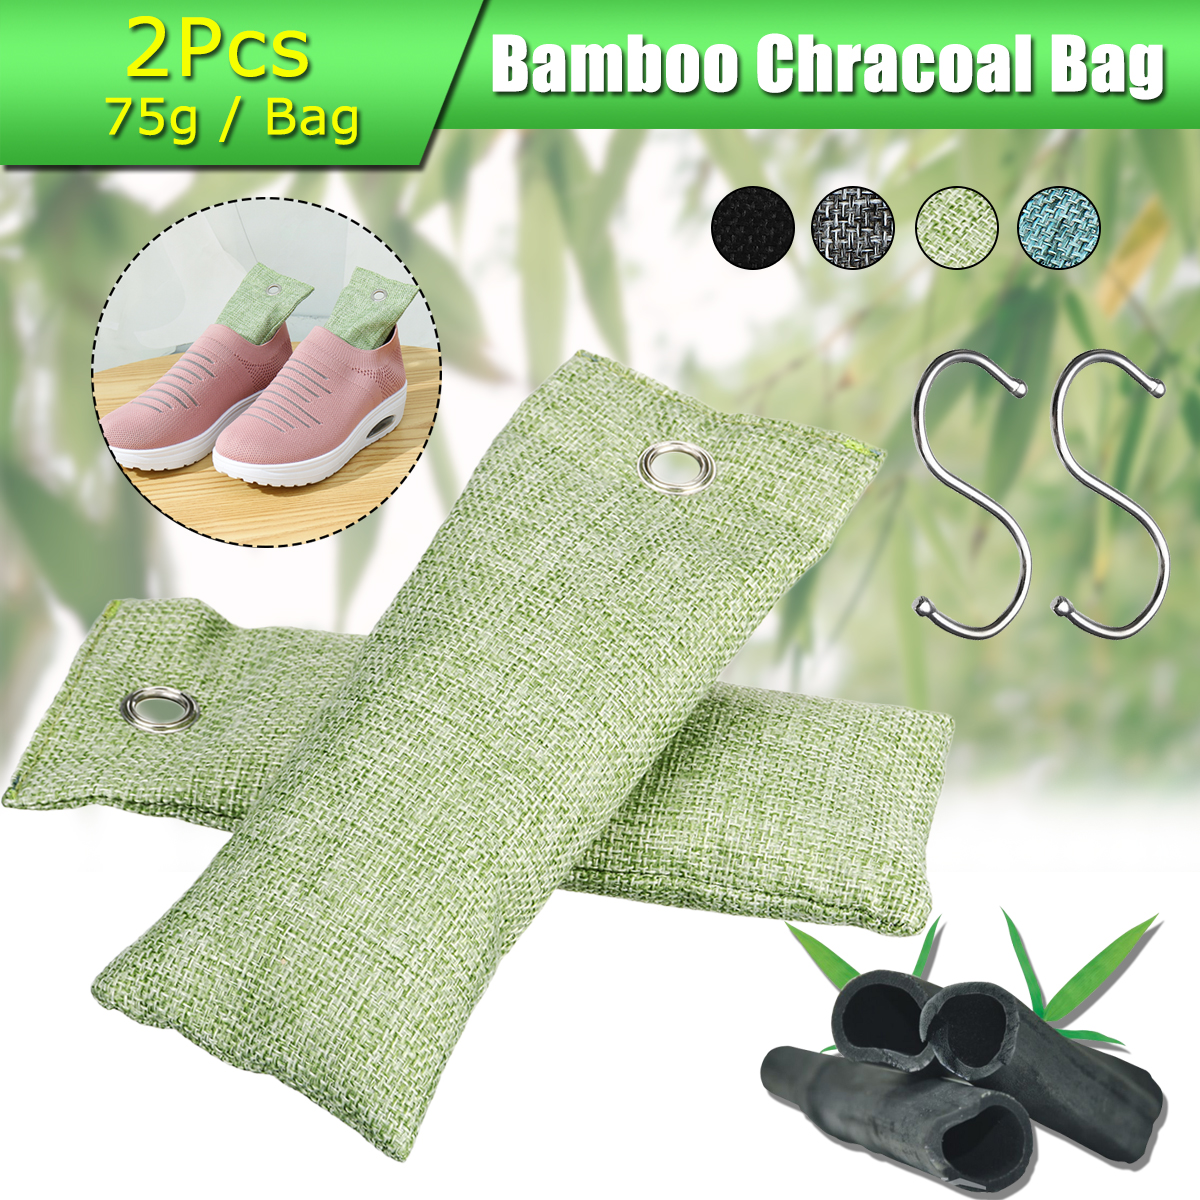 2x-Air-Purifier-Bag-Bamboo-Charcoal-Fresher-Shoes-Mold-Odor-Remover-House-Car-Purifying-Bag-1627507-1